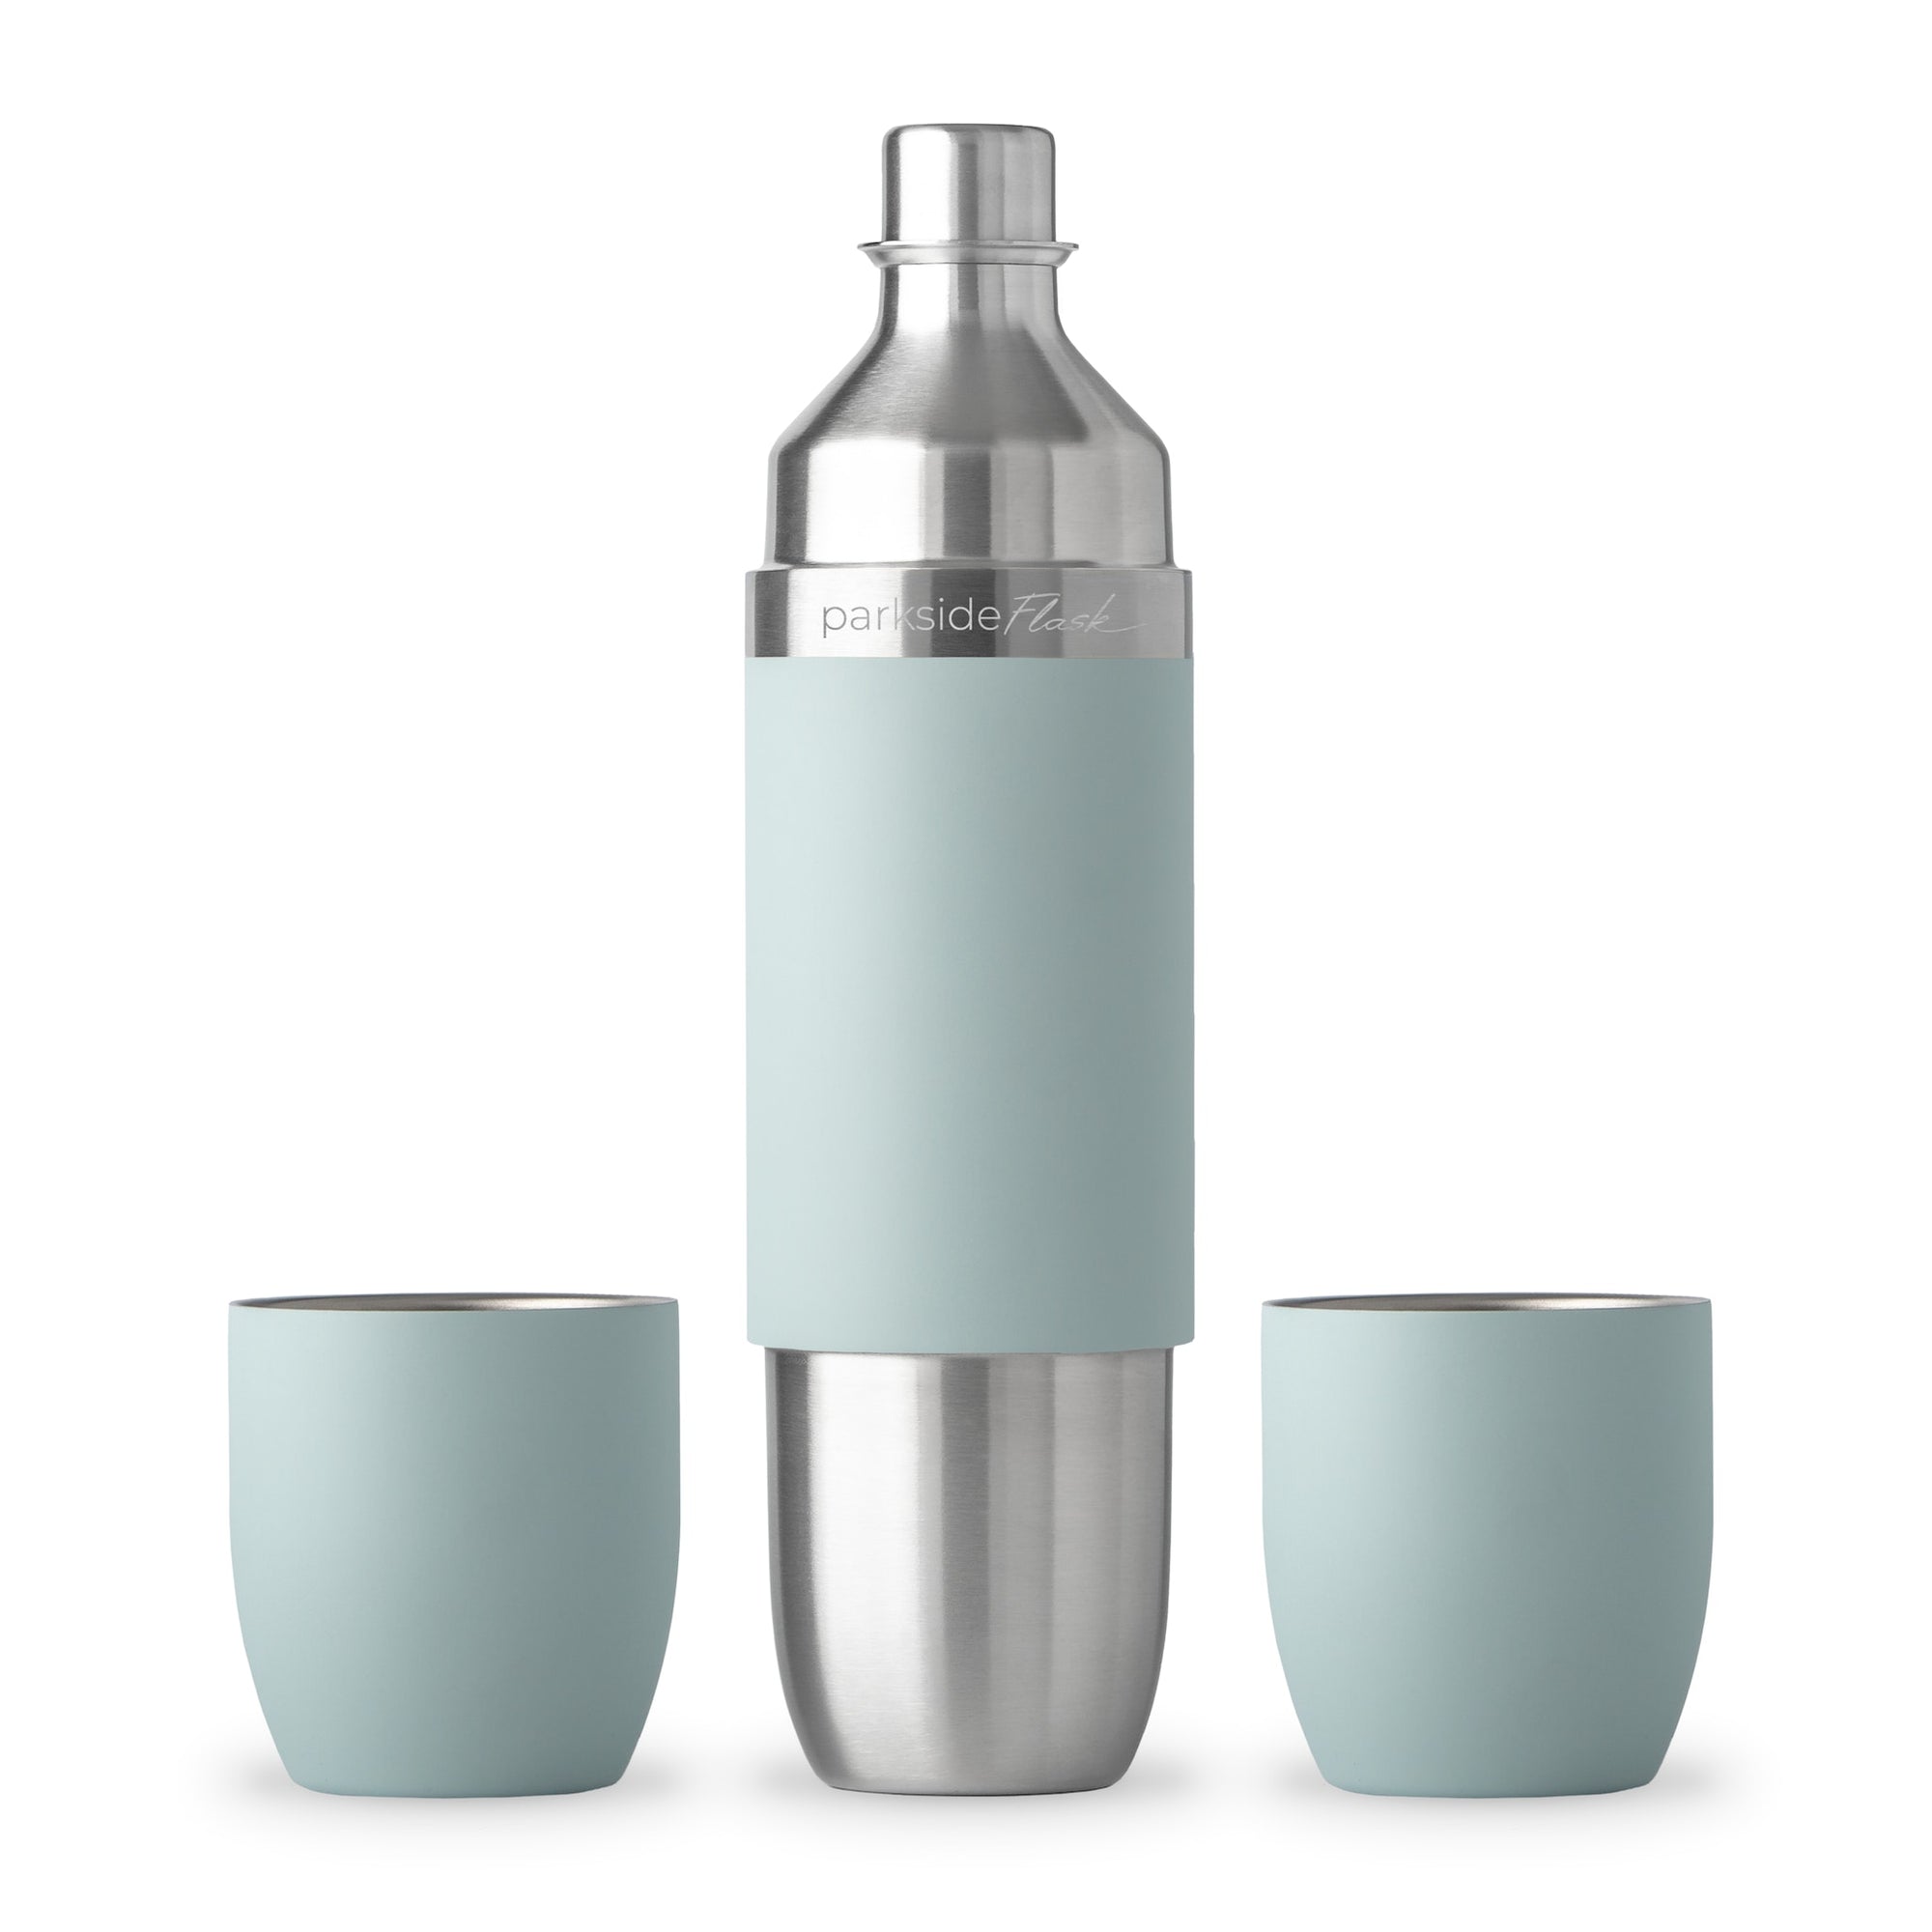 Bundle Sets of Insulated Bottles, Cups and Tumblers